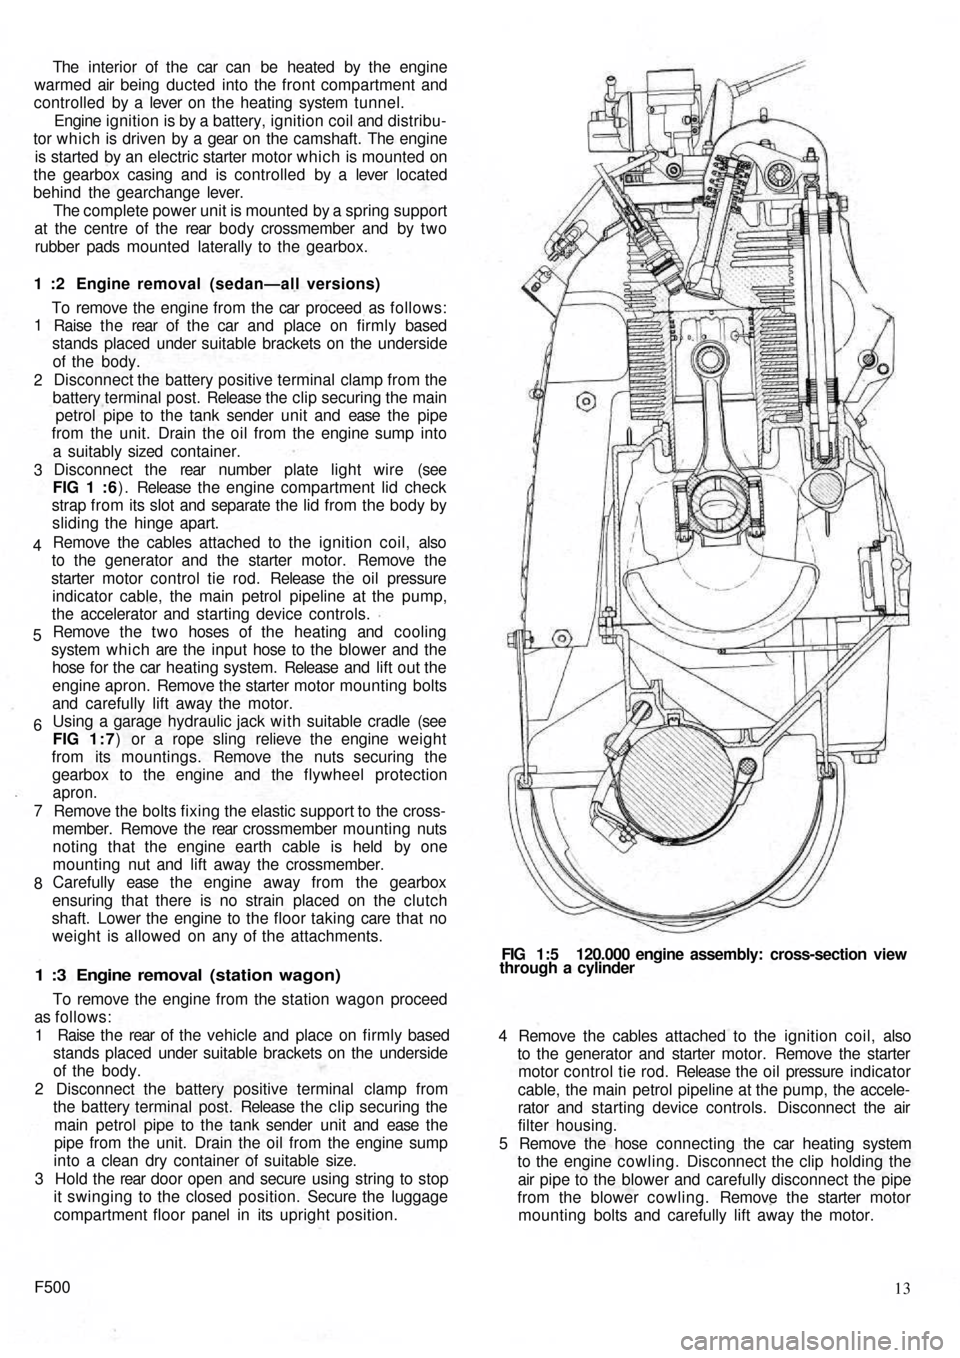 FIAT 500 1959 1.G Workshop Manual The  interior of the  car can  be heated by the engine
warmed air being ducted into the front compartment and
controlled  by a  lever on the heating system tunnel.
Engine ignition is by a battery, ign